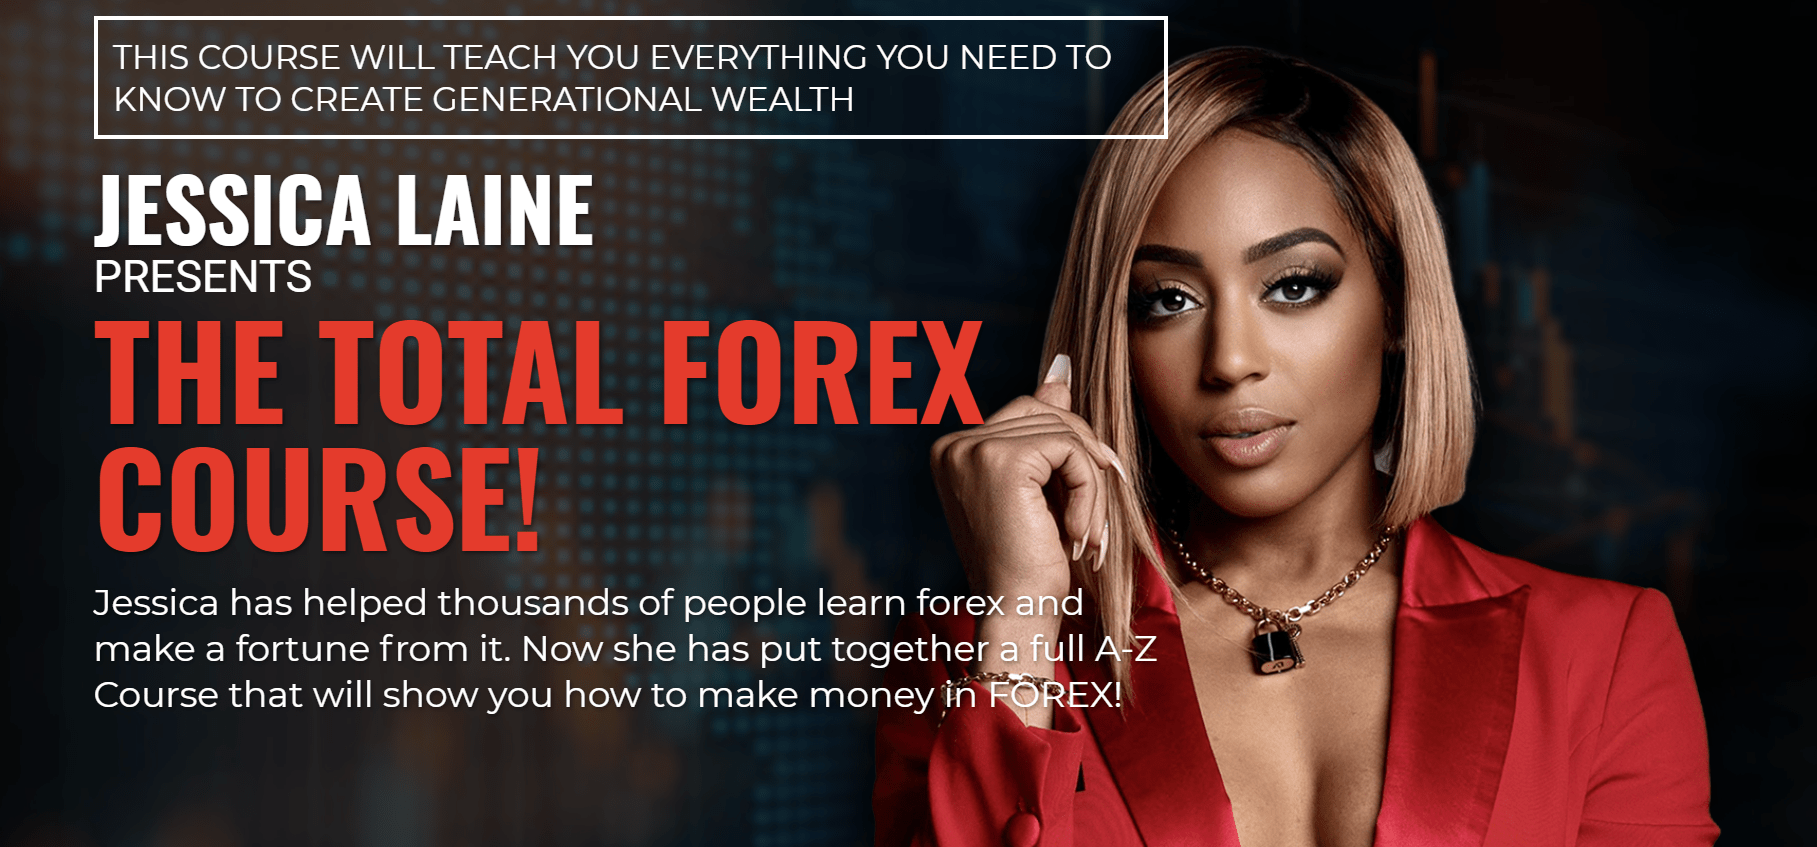 Jessica Laine - The Total Forex Course